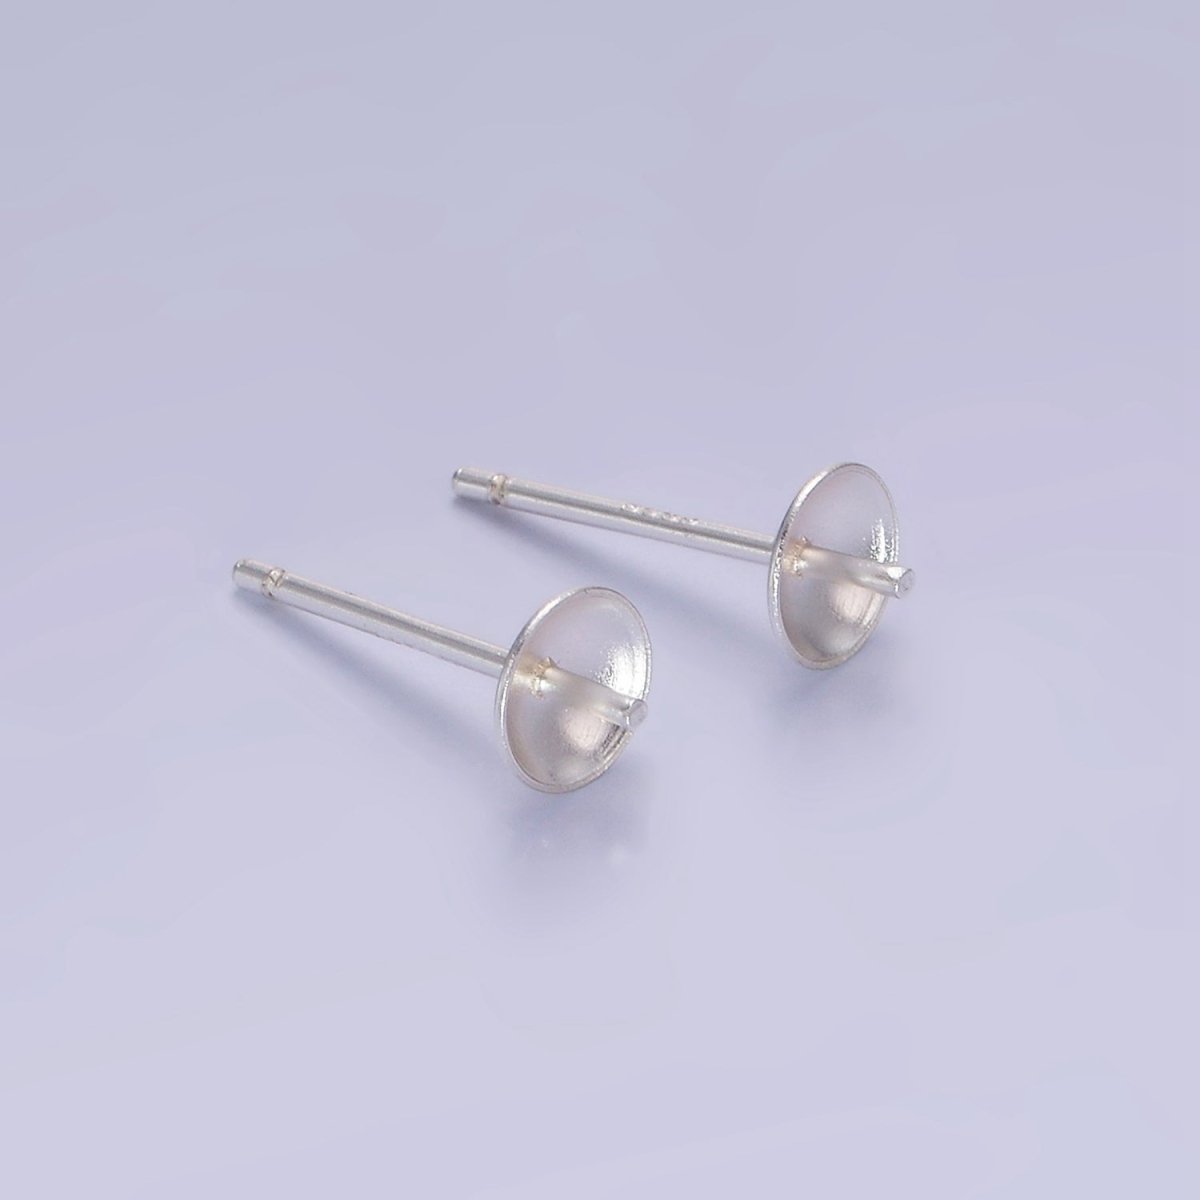 1 pair S925 Sterling Silver Drill Post Stud with peck Earrings Findings for Jewelry Making | SL-363 - DLUXCA